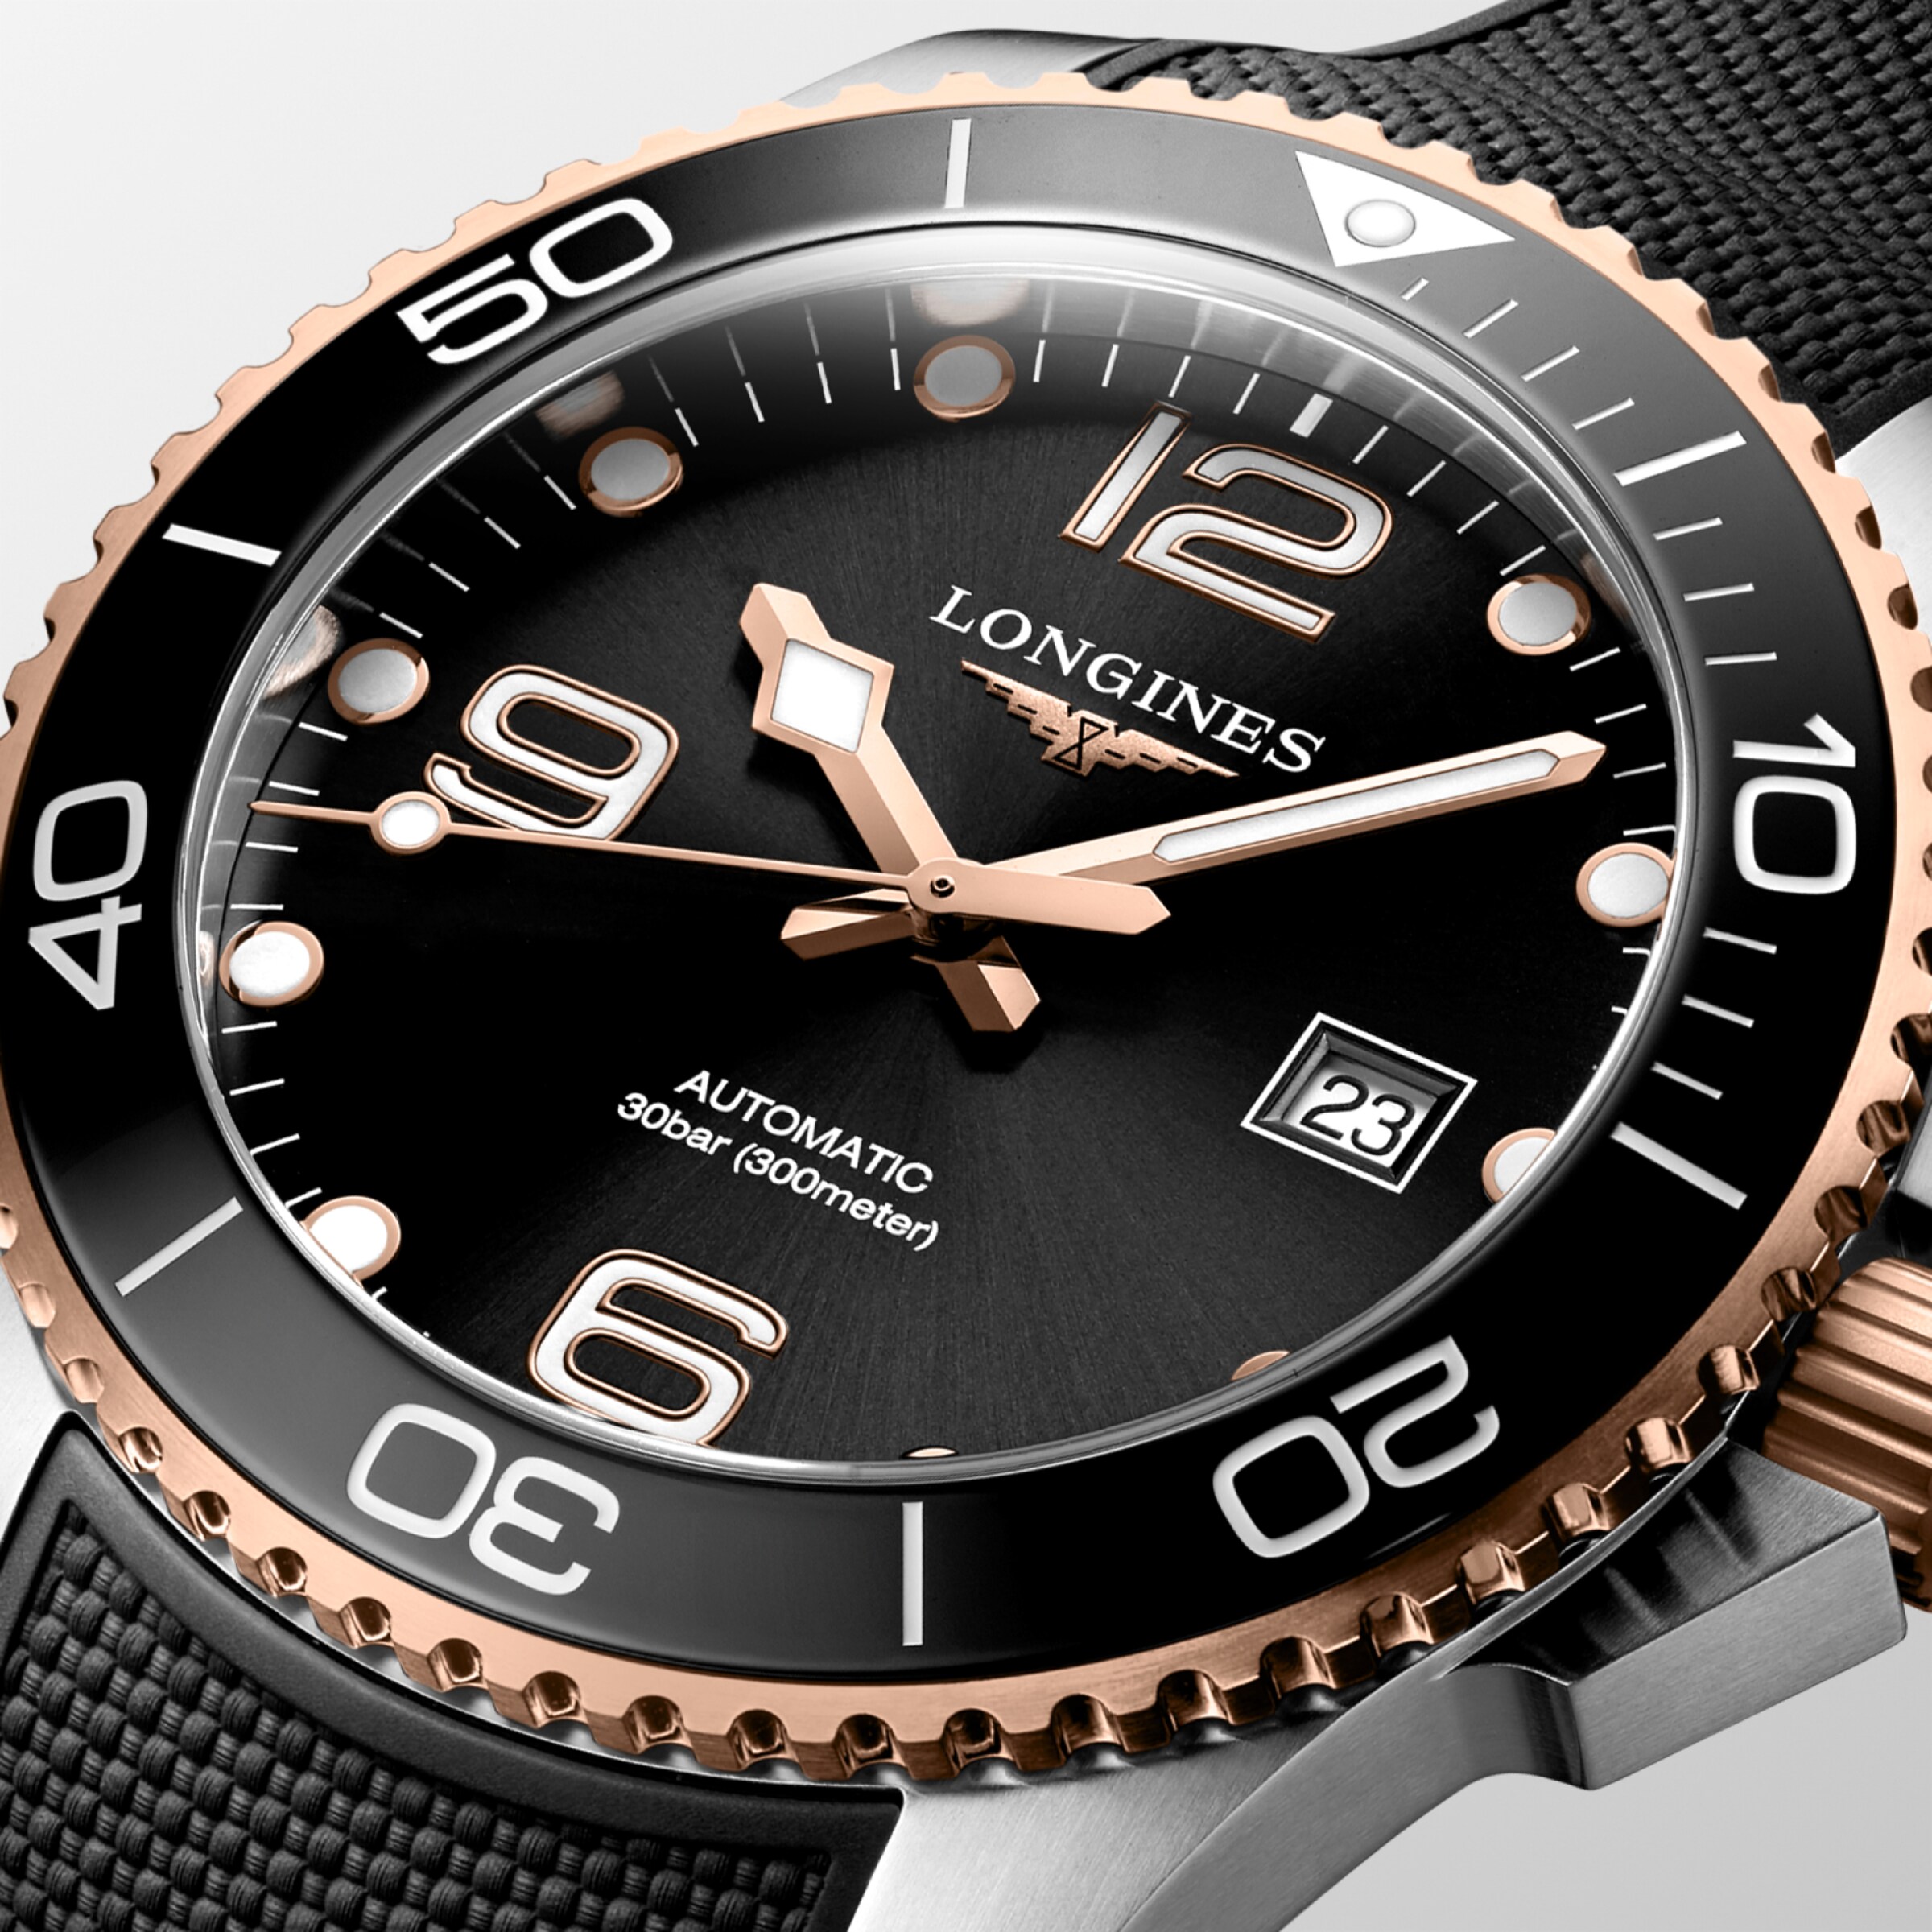 Longines HYDROCONQUEST Automatic Stainless steel and ceramic bezel Watch - L3.782.3.58.9